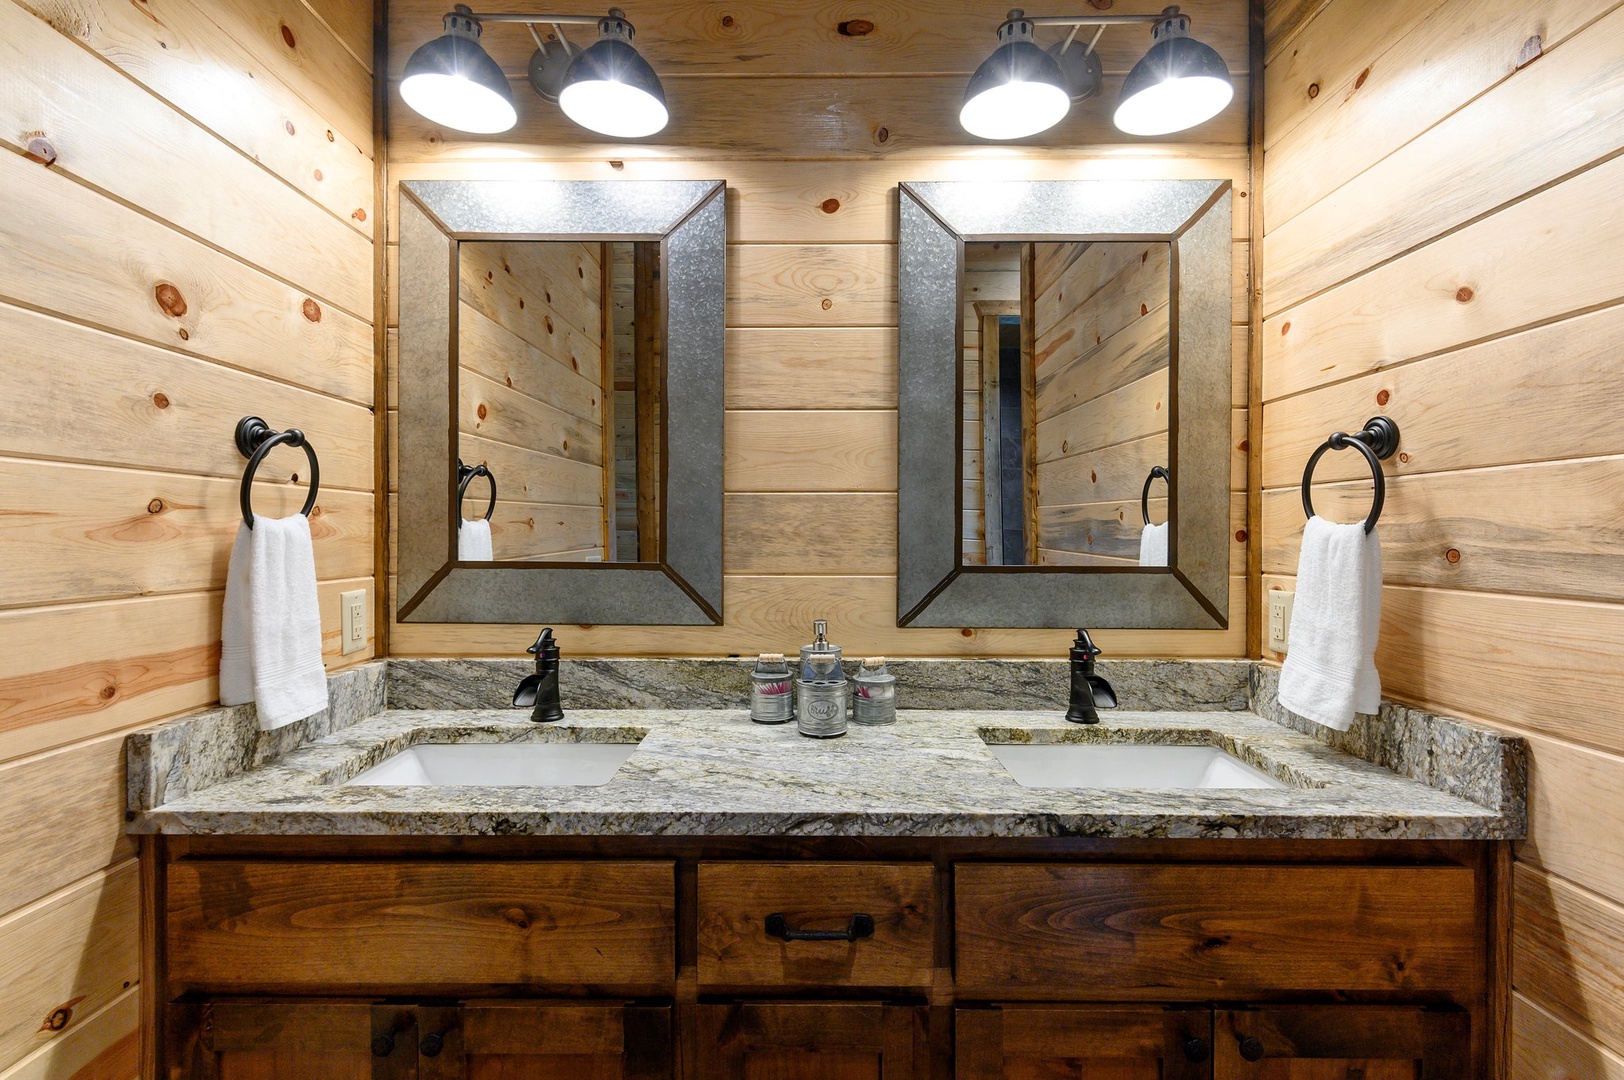 Double vanity provides plenty of his and hers space